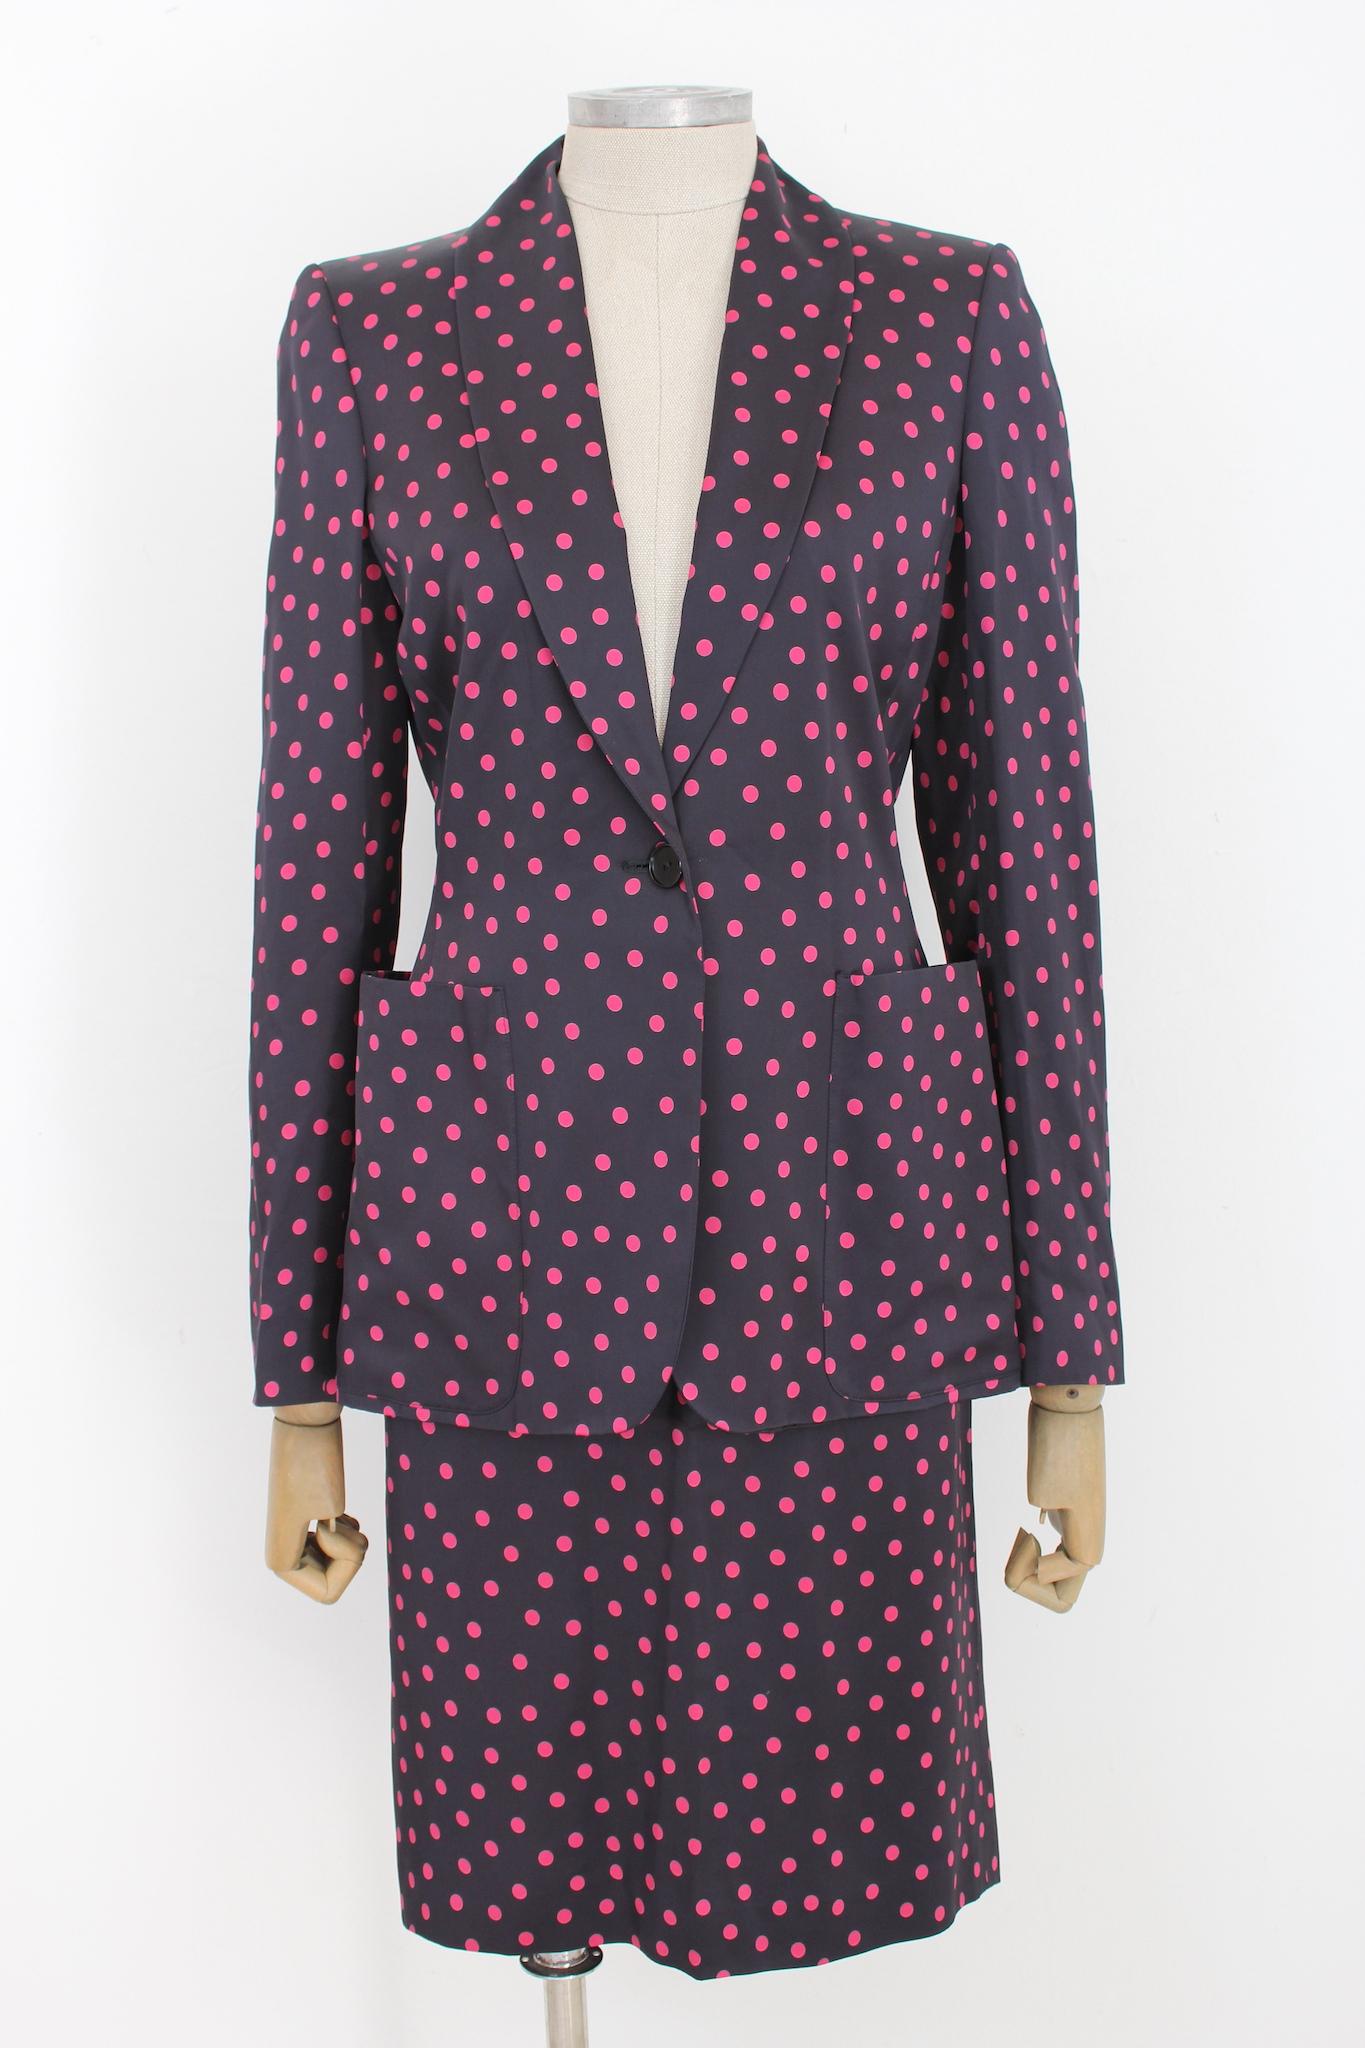 Beautiful Jean Paul Gaultier Femme polka dot vintage 90s suit skirt. Blue and fuchsia color, fitted jacket and pencil skirt. 100% rayon fabric, internally lined, the jacket has shoulder pads. Made in Italy.

Size: 42 It 8 Us 10 Uk

Shoulder: 42